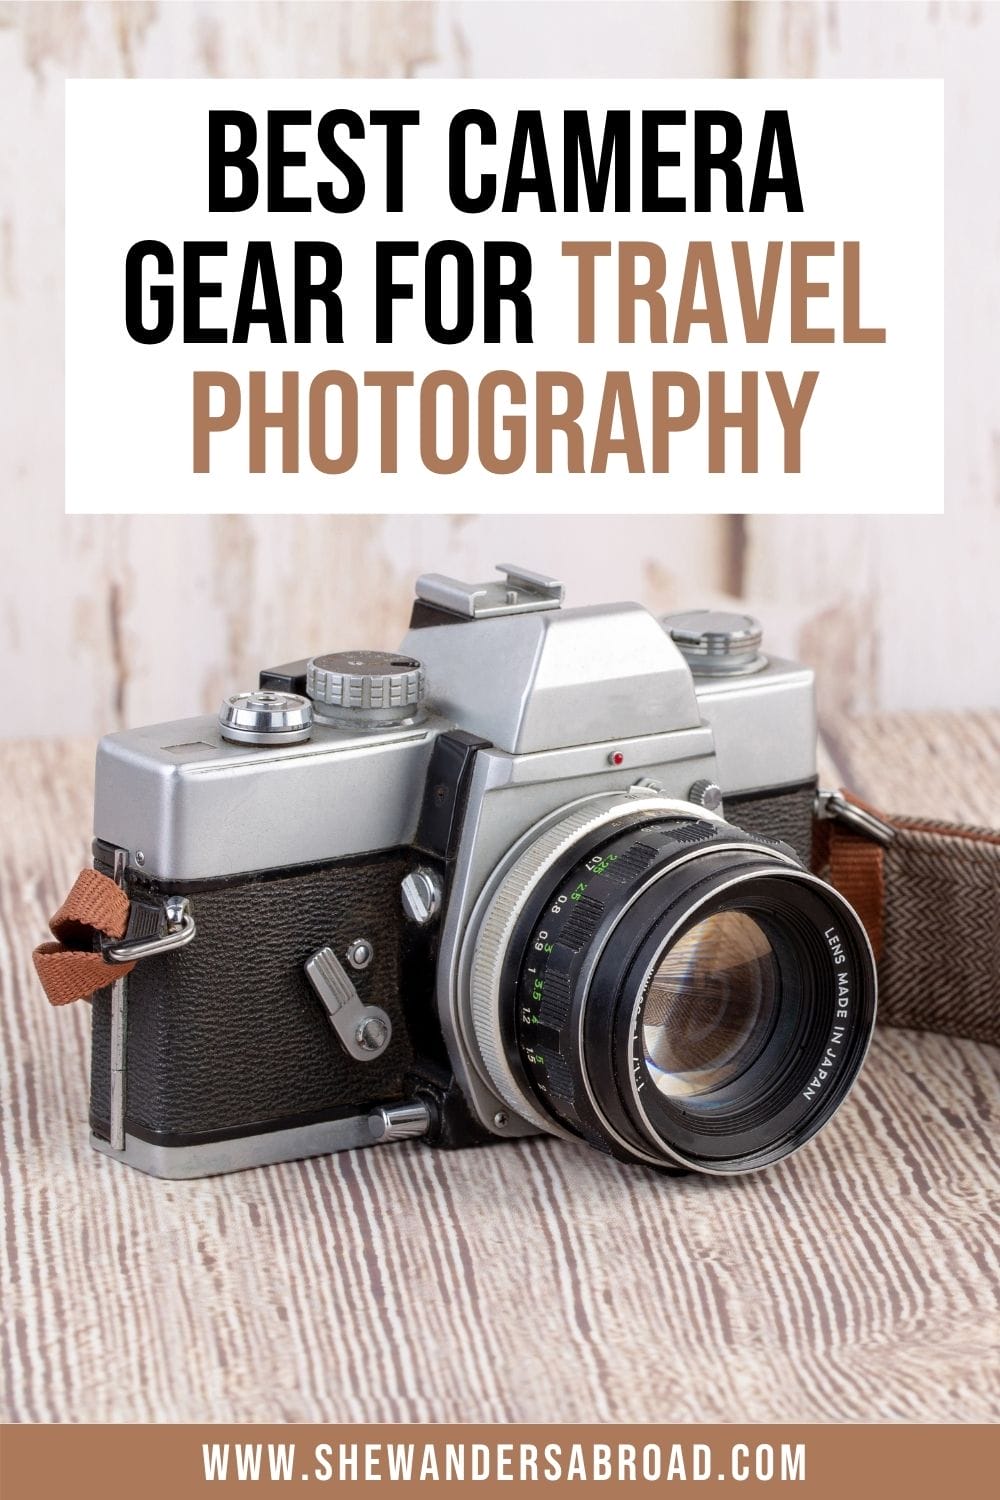 Best Travel Photography Gear for Travel Bloggers